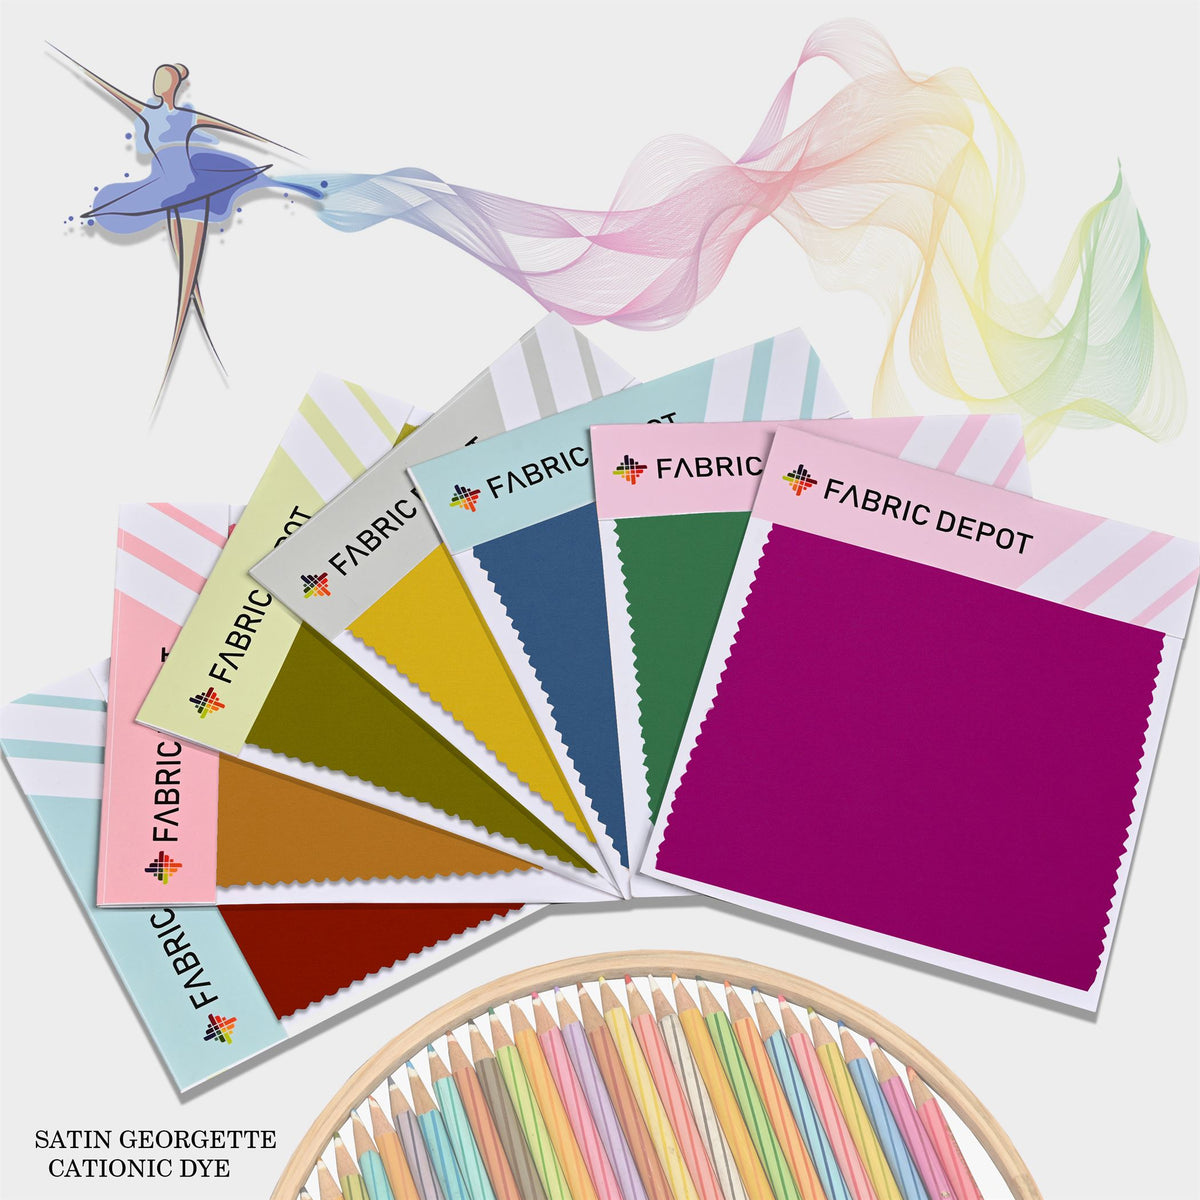 Satin Georgette Cationic-Dye-Swatch Card